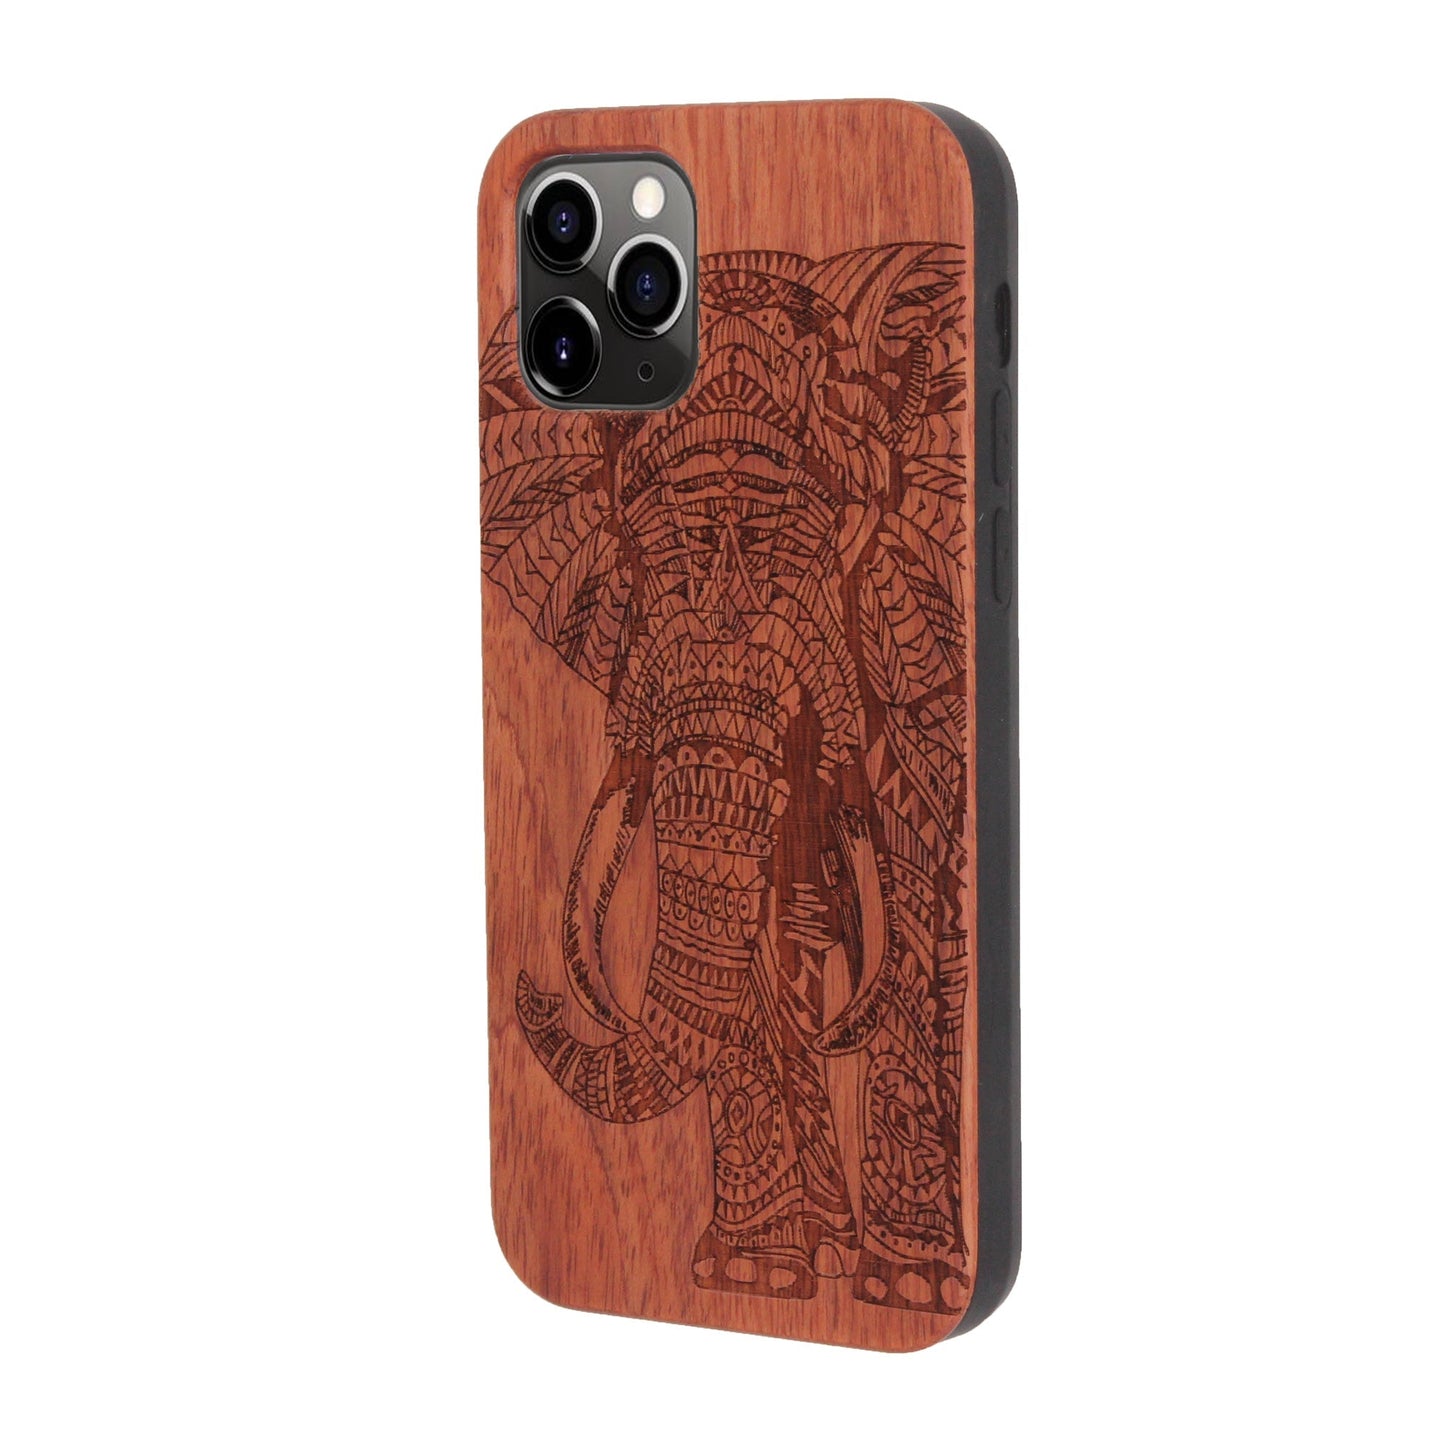 Rosewood Elephant Eden Case for iPhone 11 Pro Max